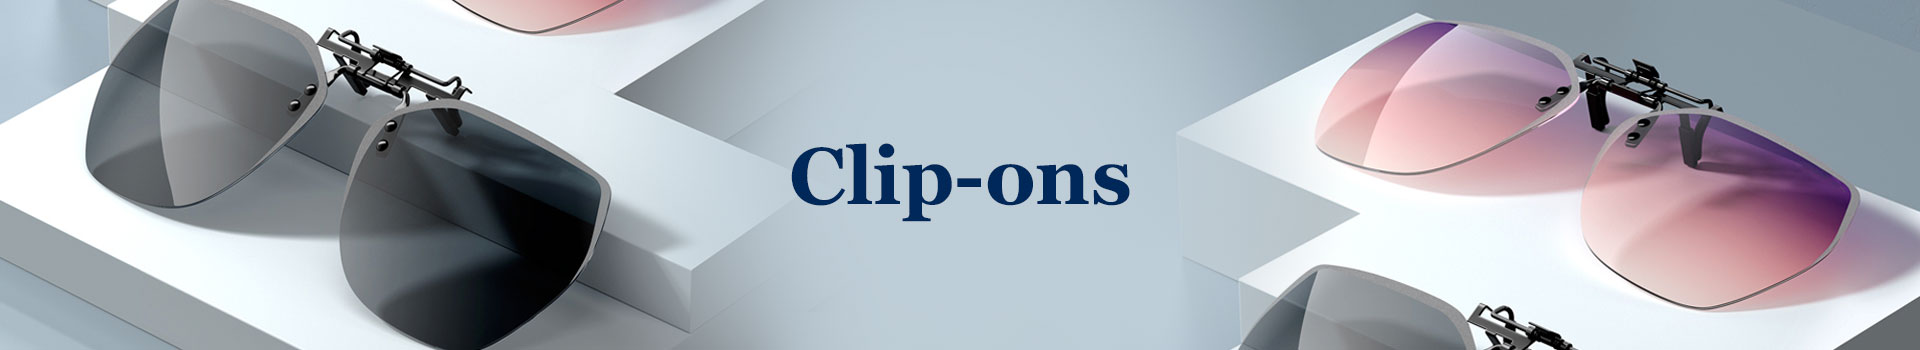 Clip-ons